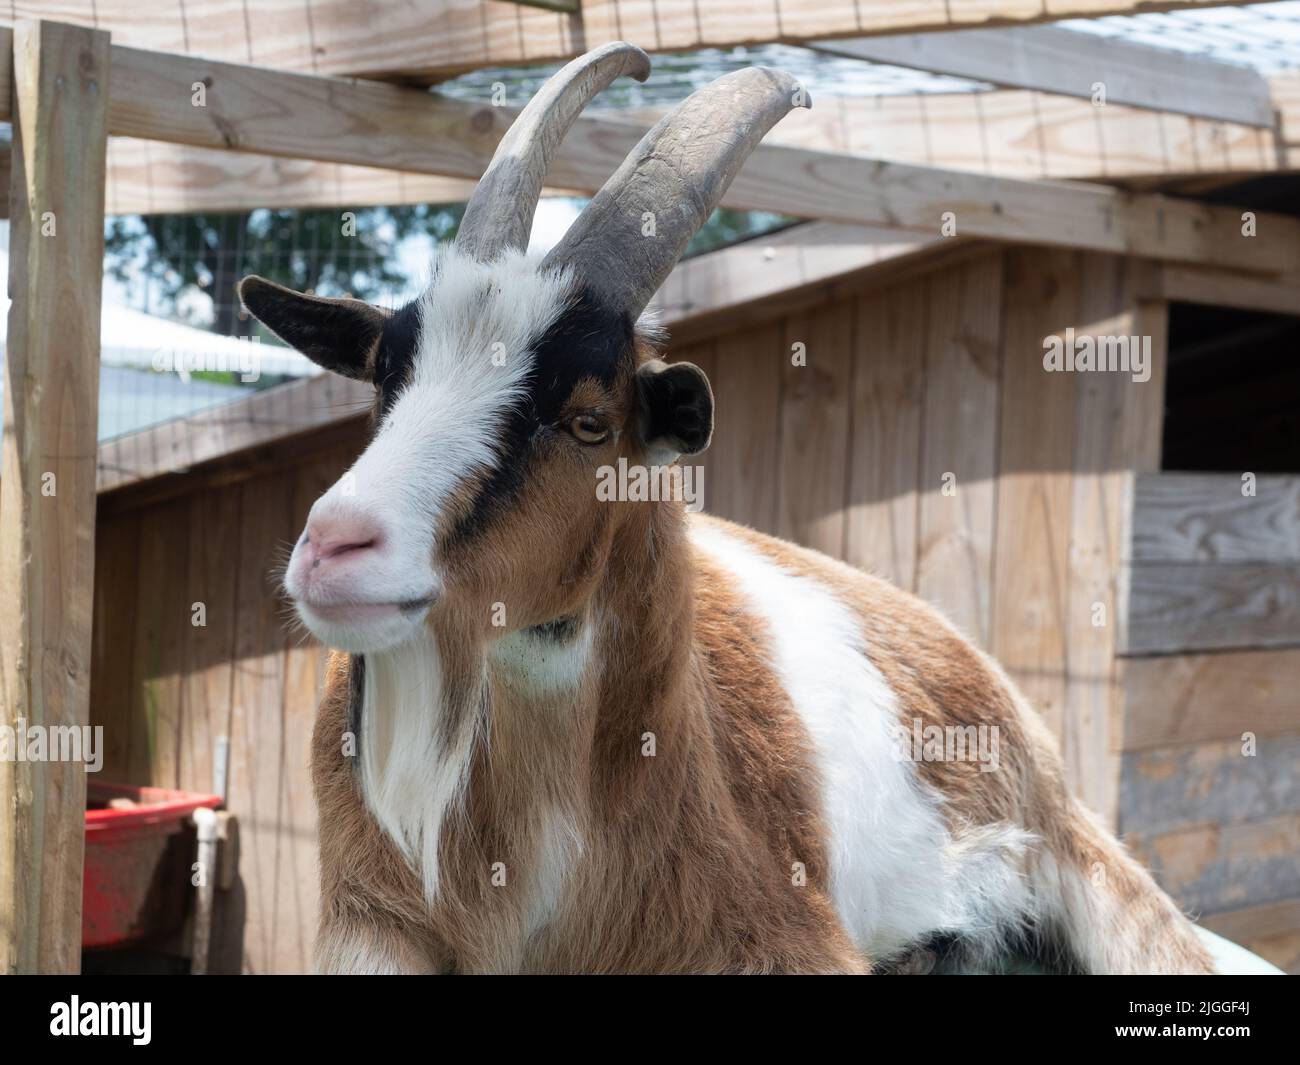 A brown, white, and black goat with horns resting in an enclosure. Stock Photo